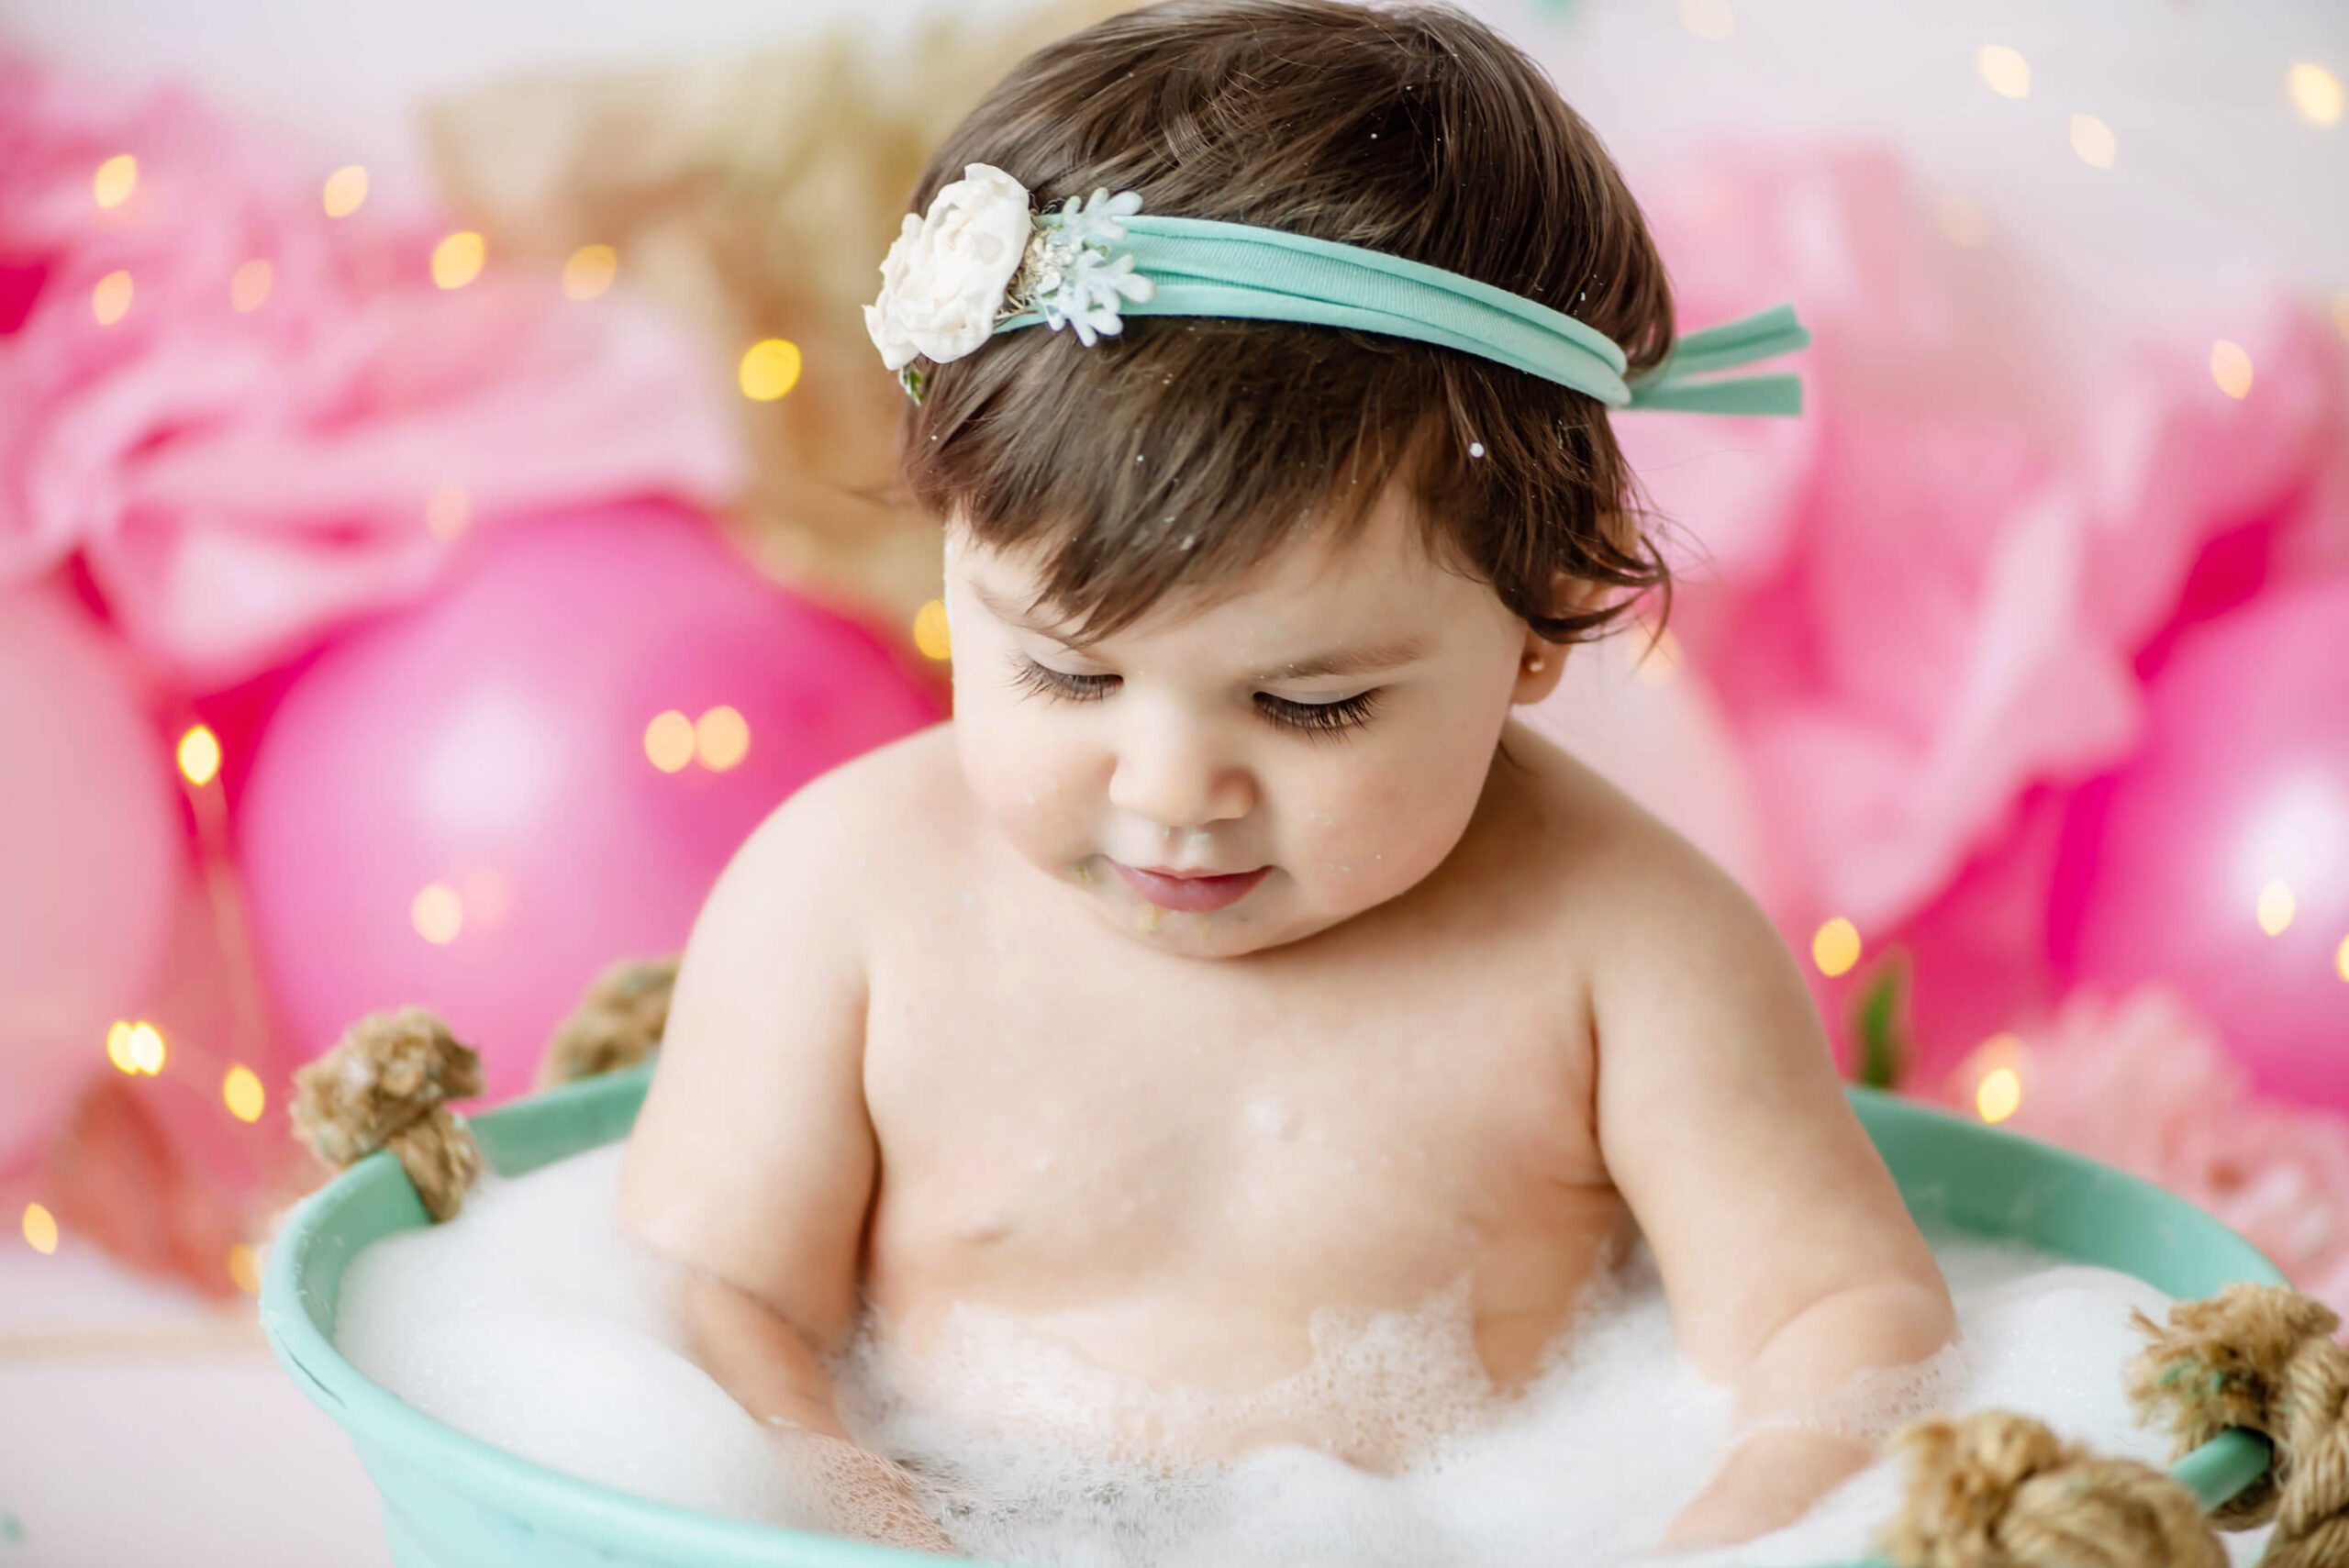 up close in bath tub photo of baby at her cake smash session in studio Burlington Ontario